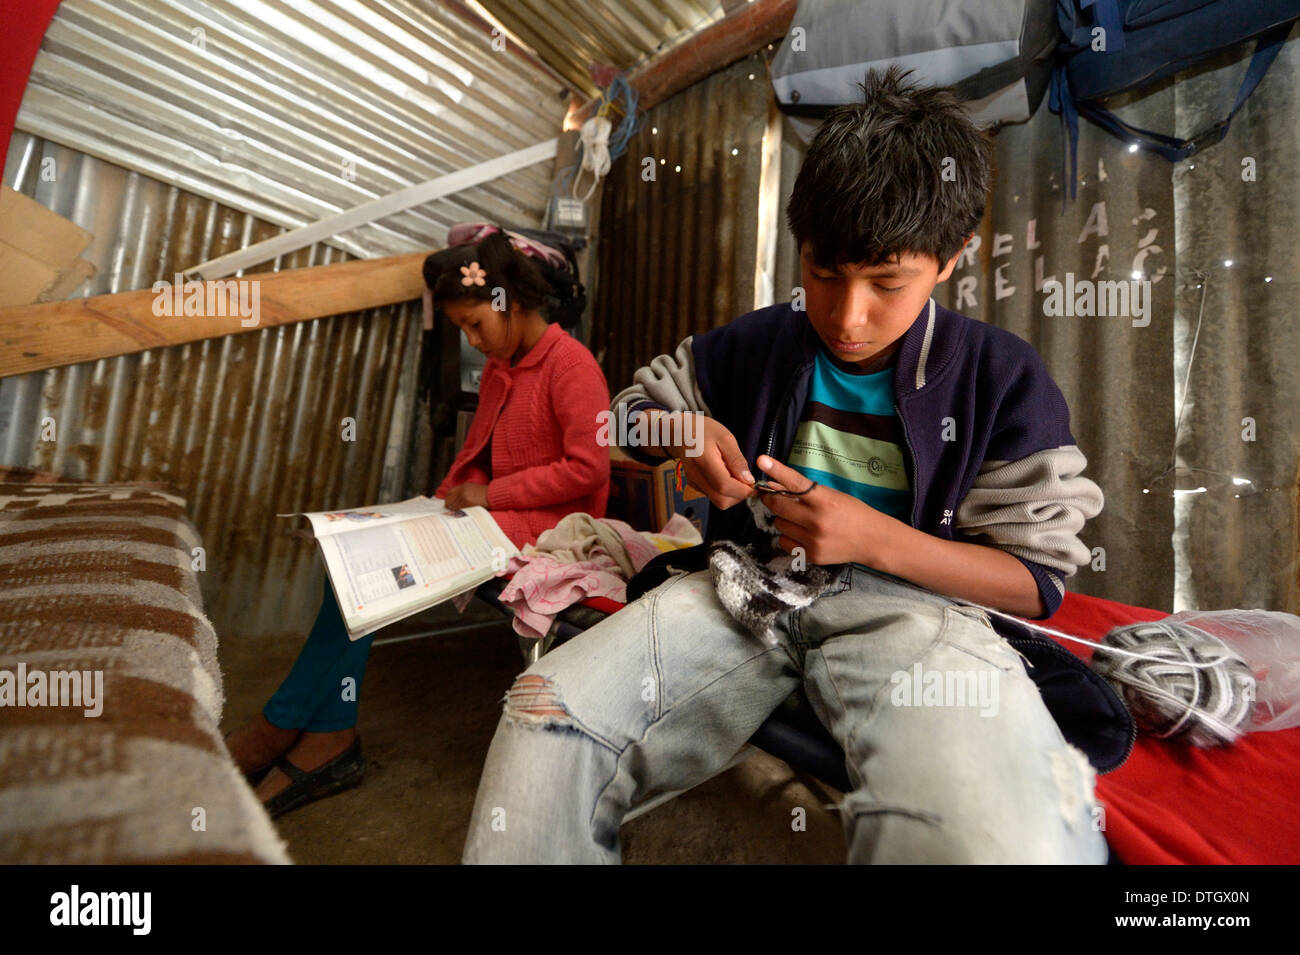 Adolescent boy, 14 years, knitting a scarf, his sister, 12 years, doing her homework, in a simple hut made of corrugated iron Stock Photo